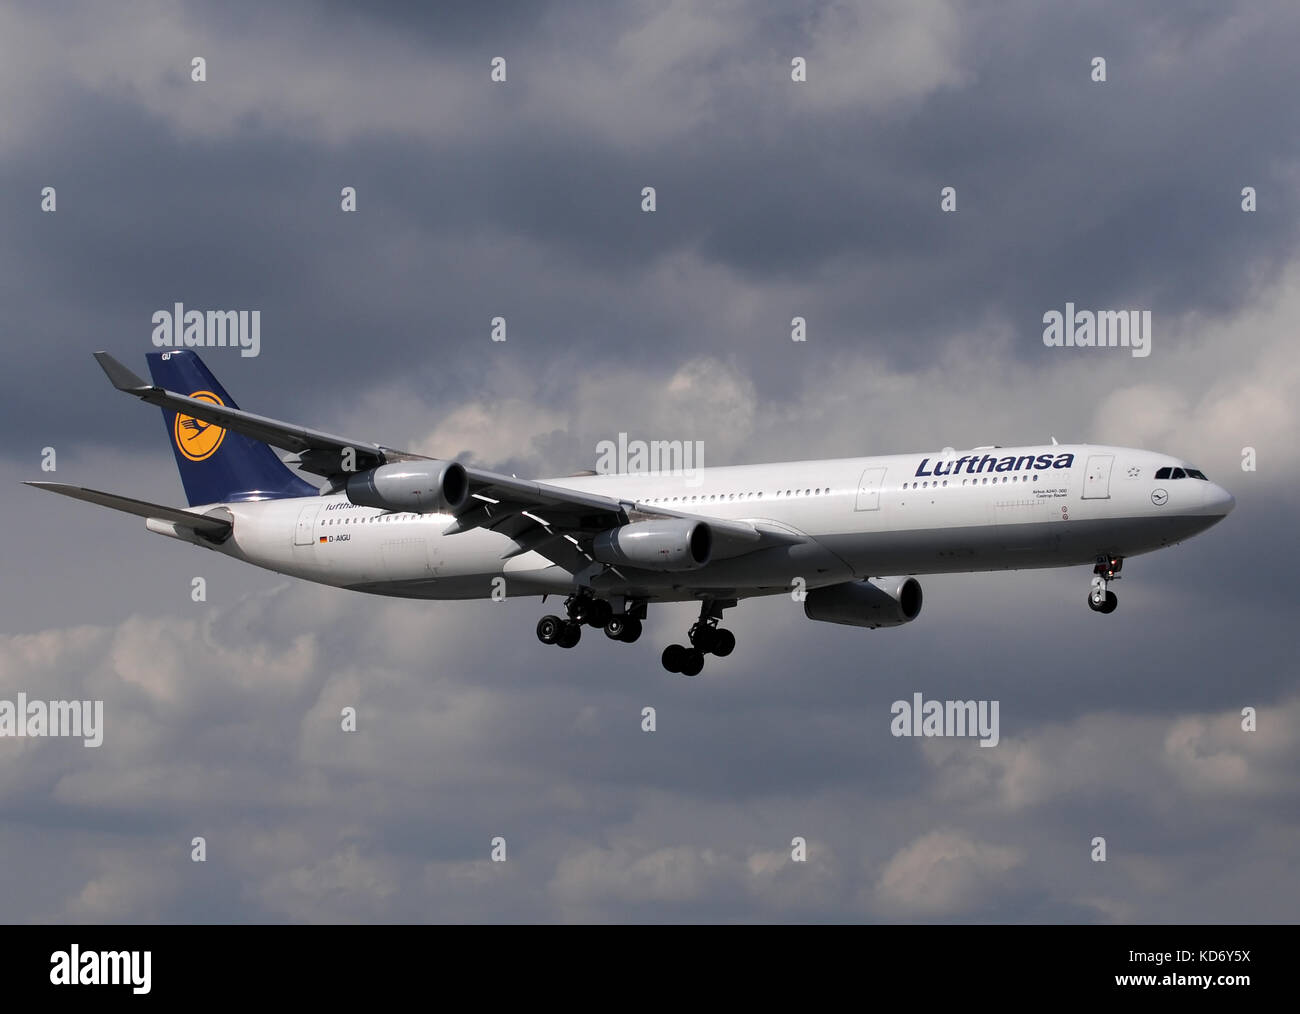 Miami, Florida - January 30, 2011: Lufthansa's Airbus A-340 widebody passenger jet landing in Miami after a flight from Germany. Miami is a popular de Stock Photo